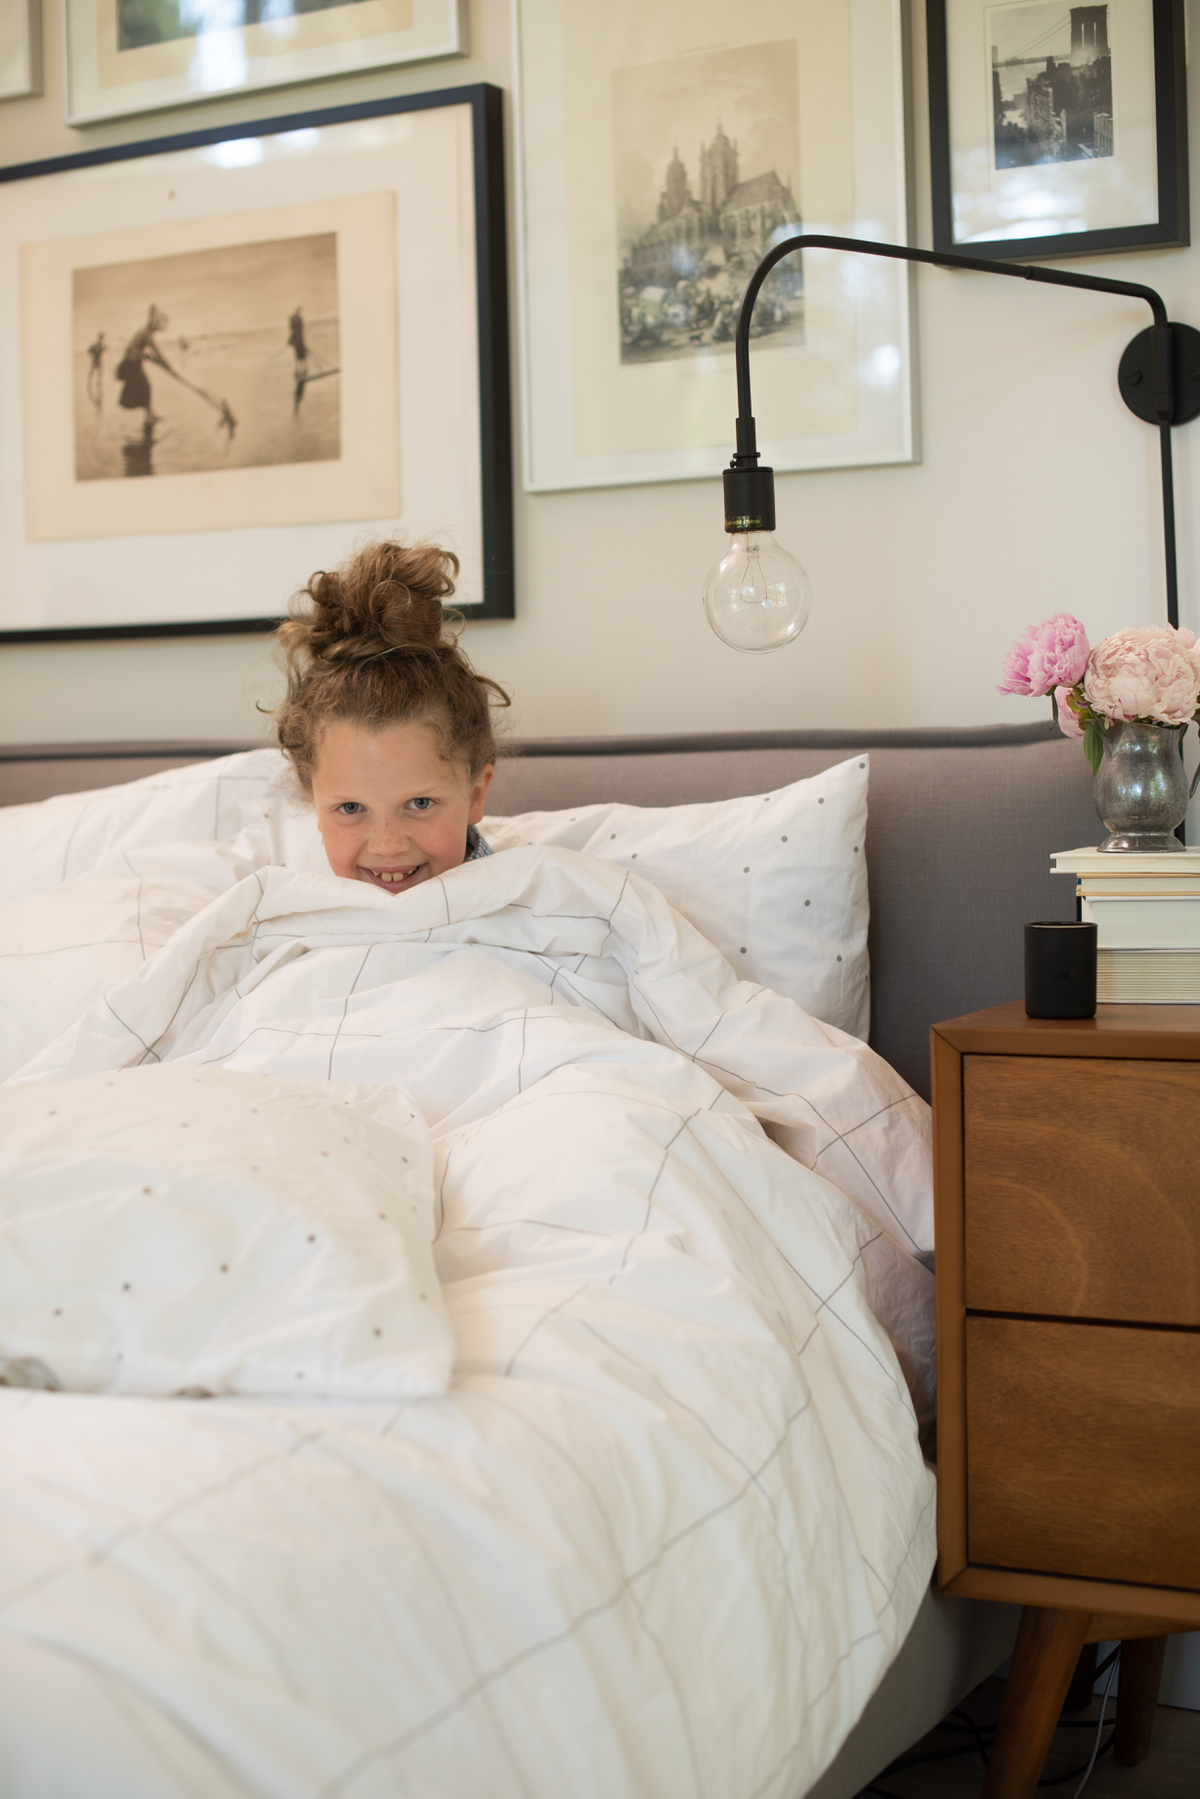 Brooklinen - The Best Sheets, Blankets & Towels You've Never Heard Of featured by popular lifestyle blogger, Design Mom